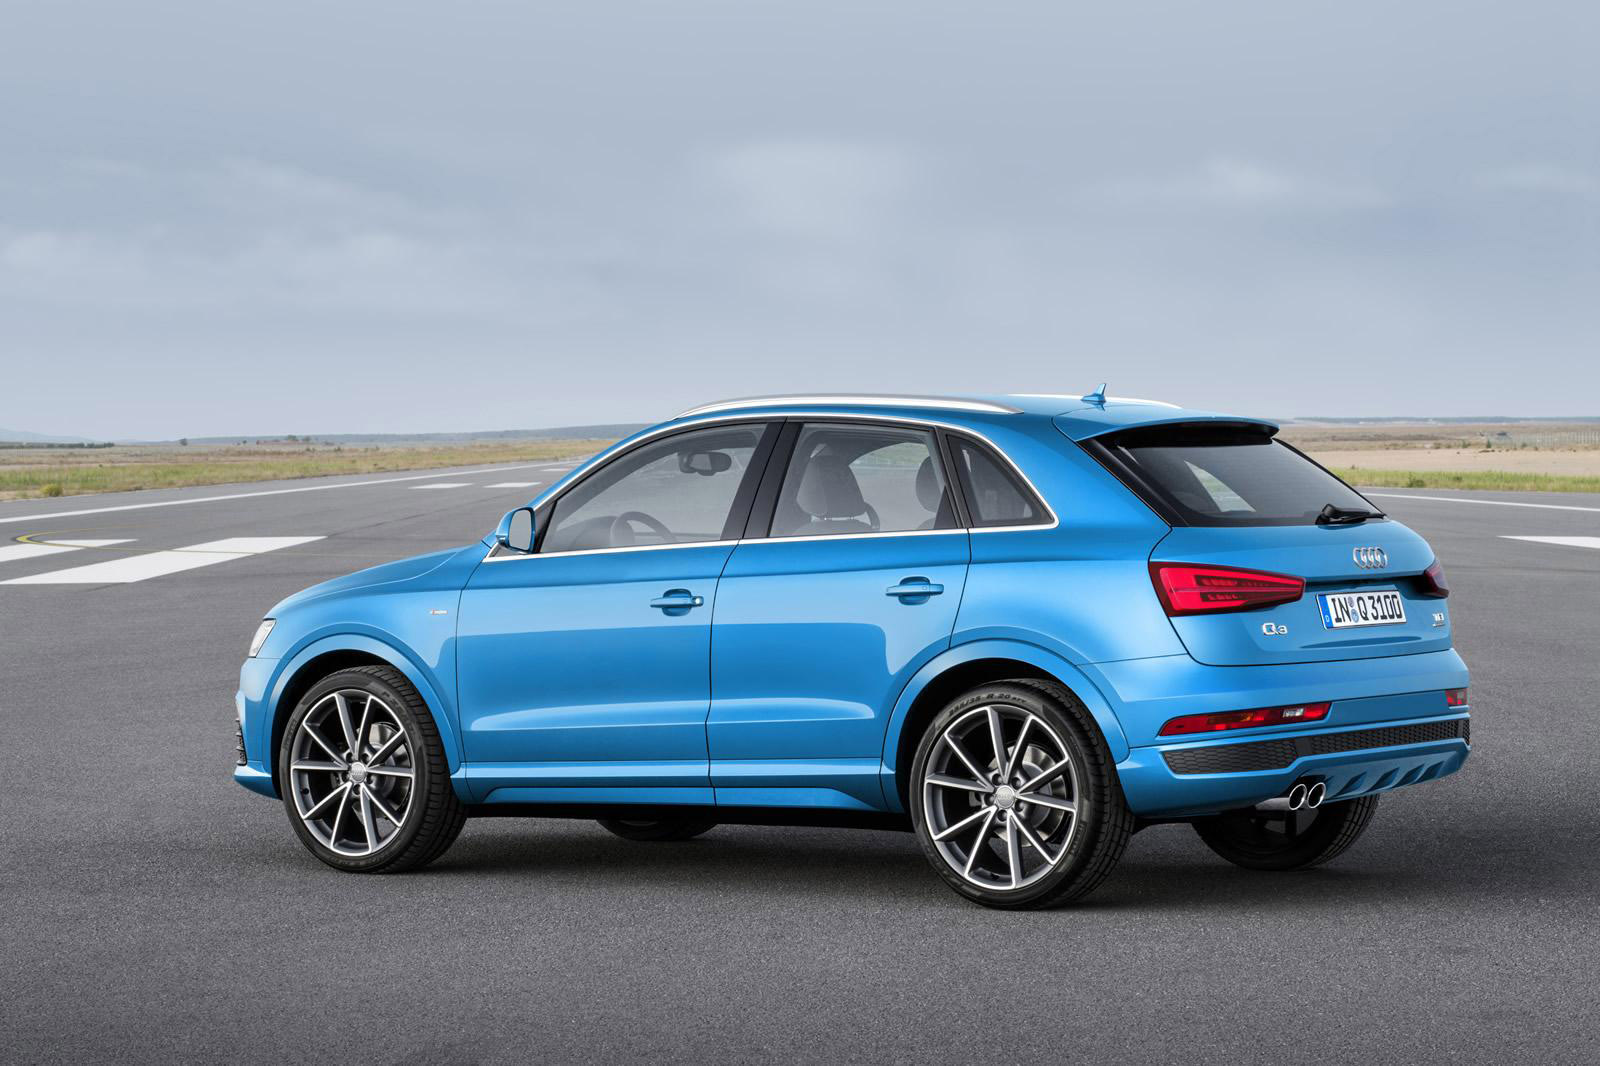 2016 Audi Q3 Compact Crossover on Sale in the United States